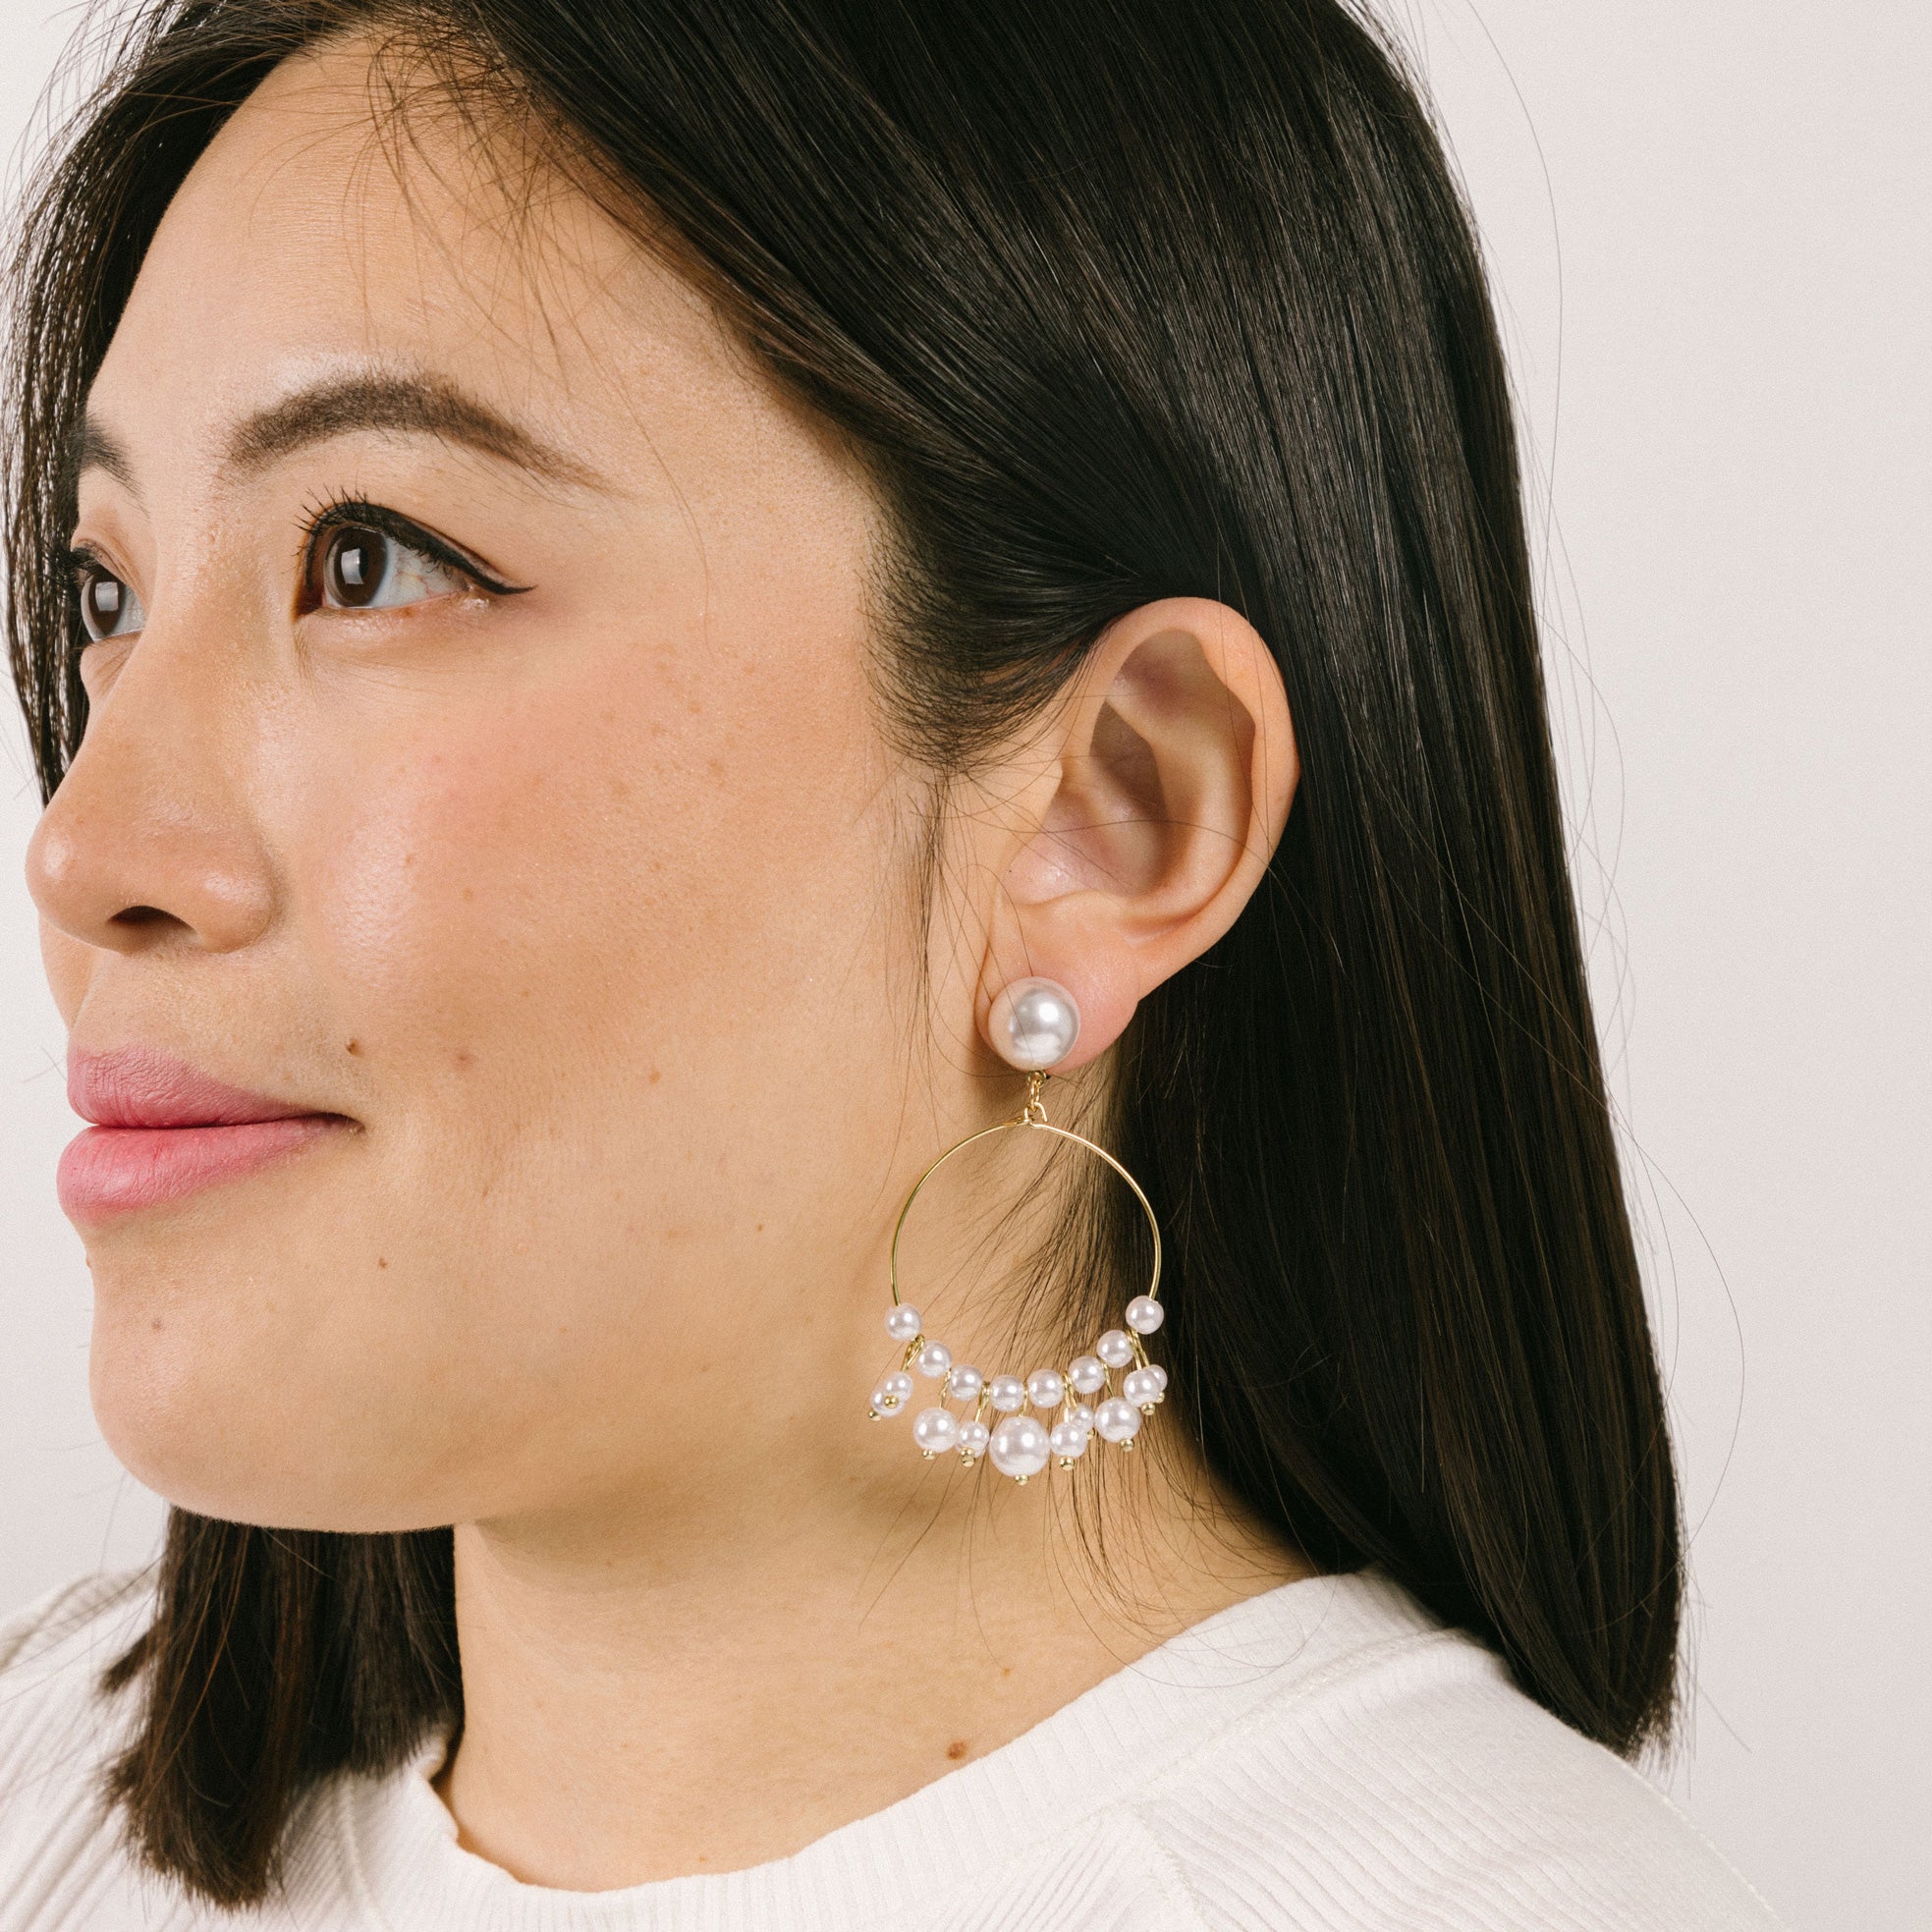 A model wearing the Delphine Clip On Earrings feature a gold-tone copper alloy and a Simulated Faux Pearl. The closure type is a padded clip-on earring with removable rubber padding, making it ideal for all ear types (including thick/large ears, sensitive ears, small/thin ears, and stretched/healing ears). You can expect a secure hold for up to 12 hours of comfortable wear. Please note that this item is sold as a single pair.